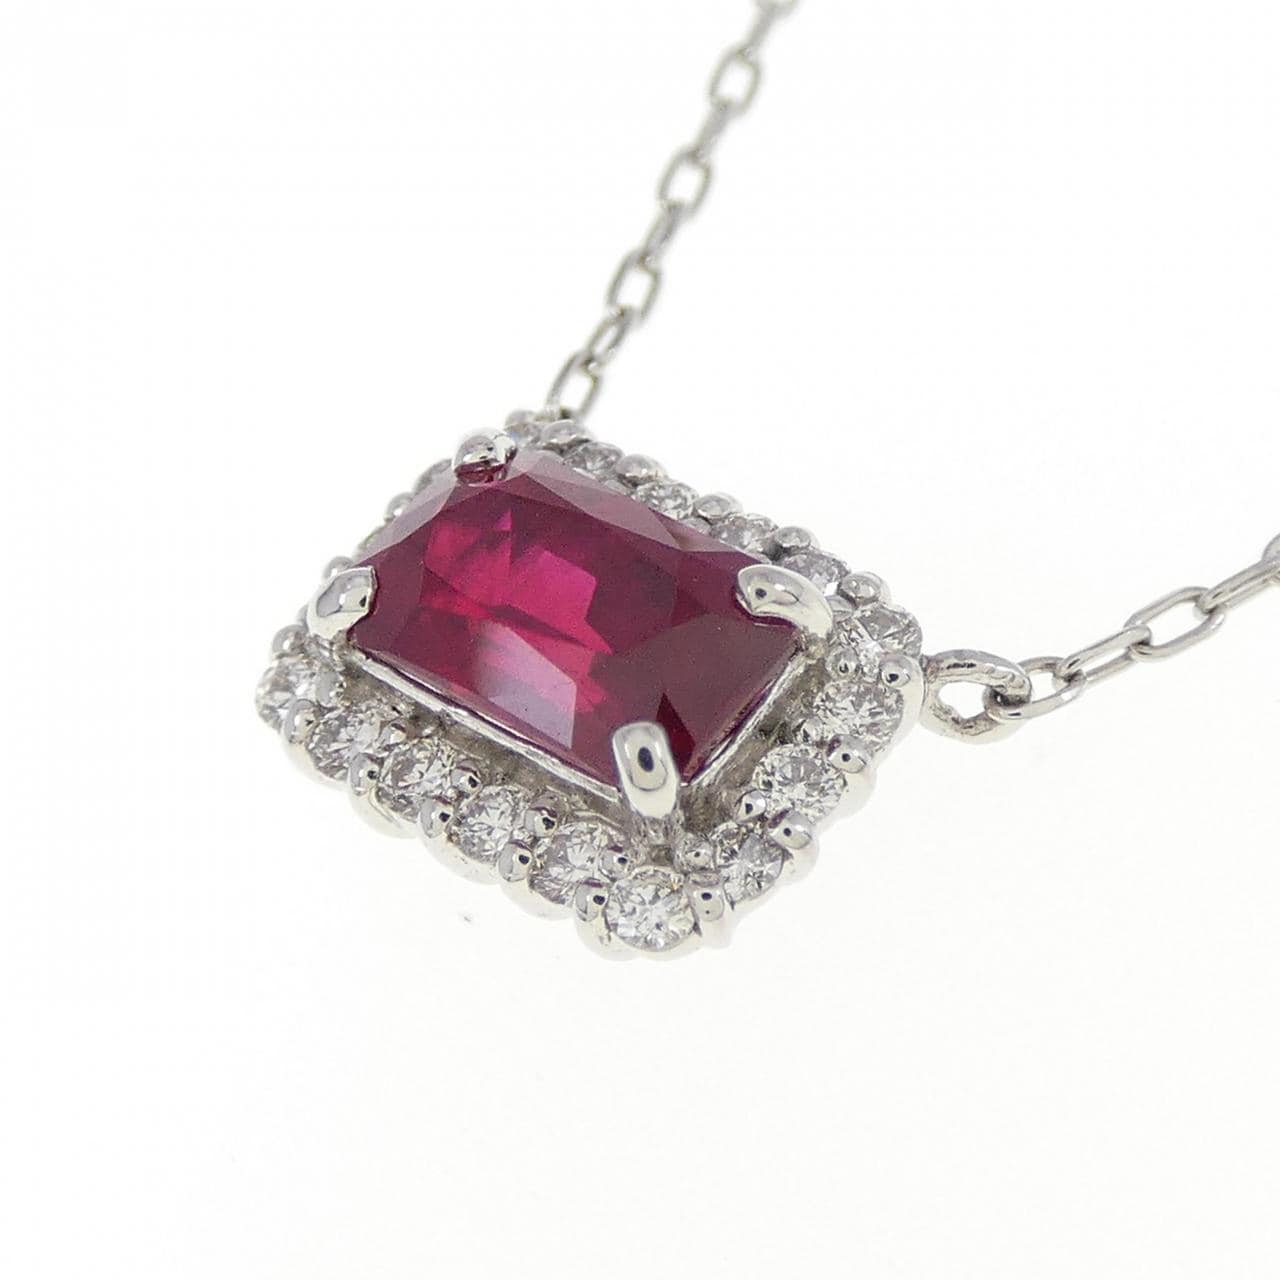 [Remake] PT Ruby Necklace 1.11CT Made in Burma